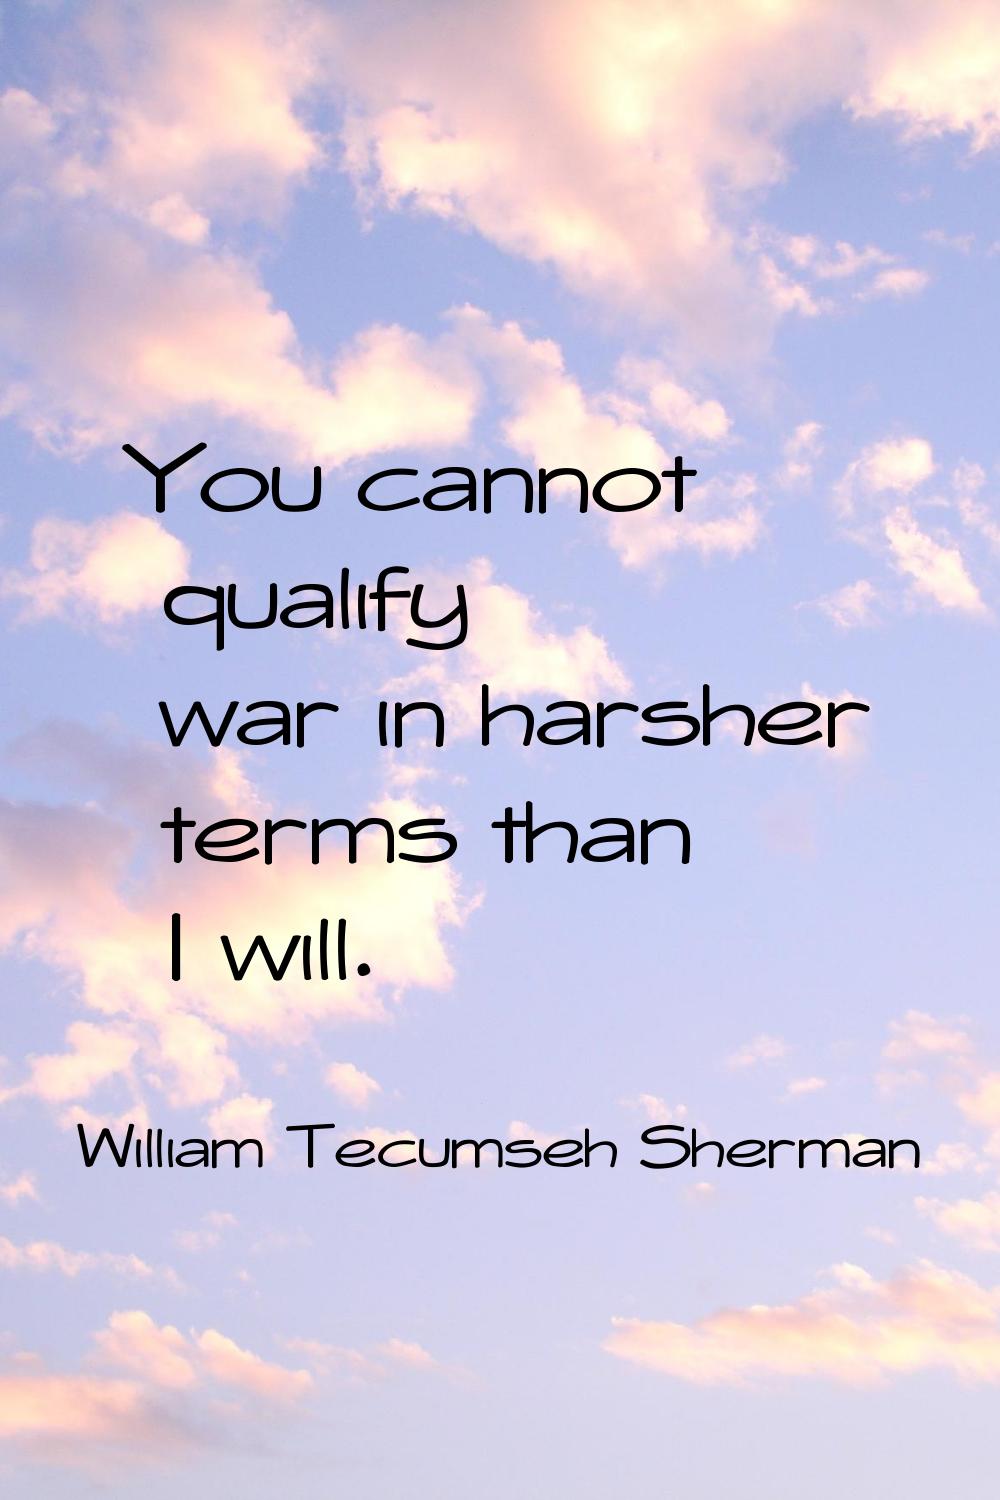 You cannot qualify war in harsher terms than I will.